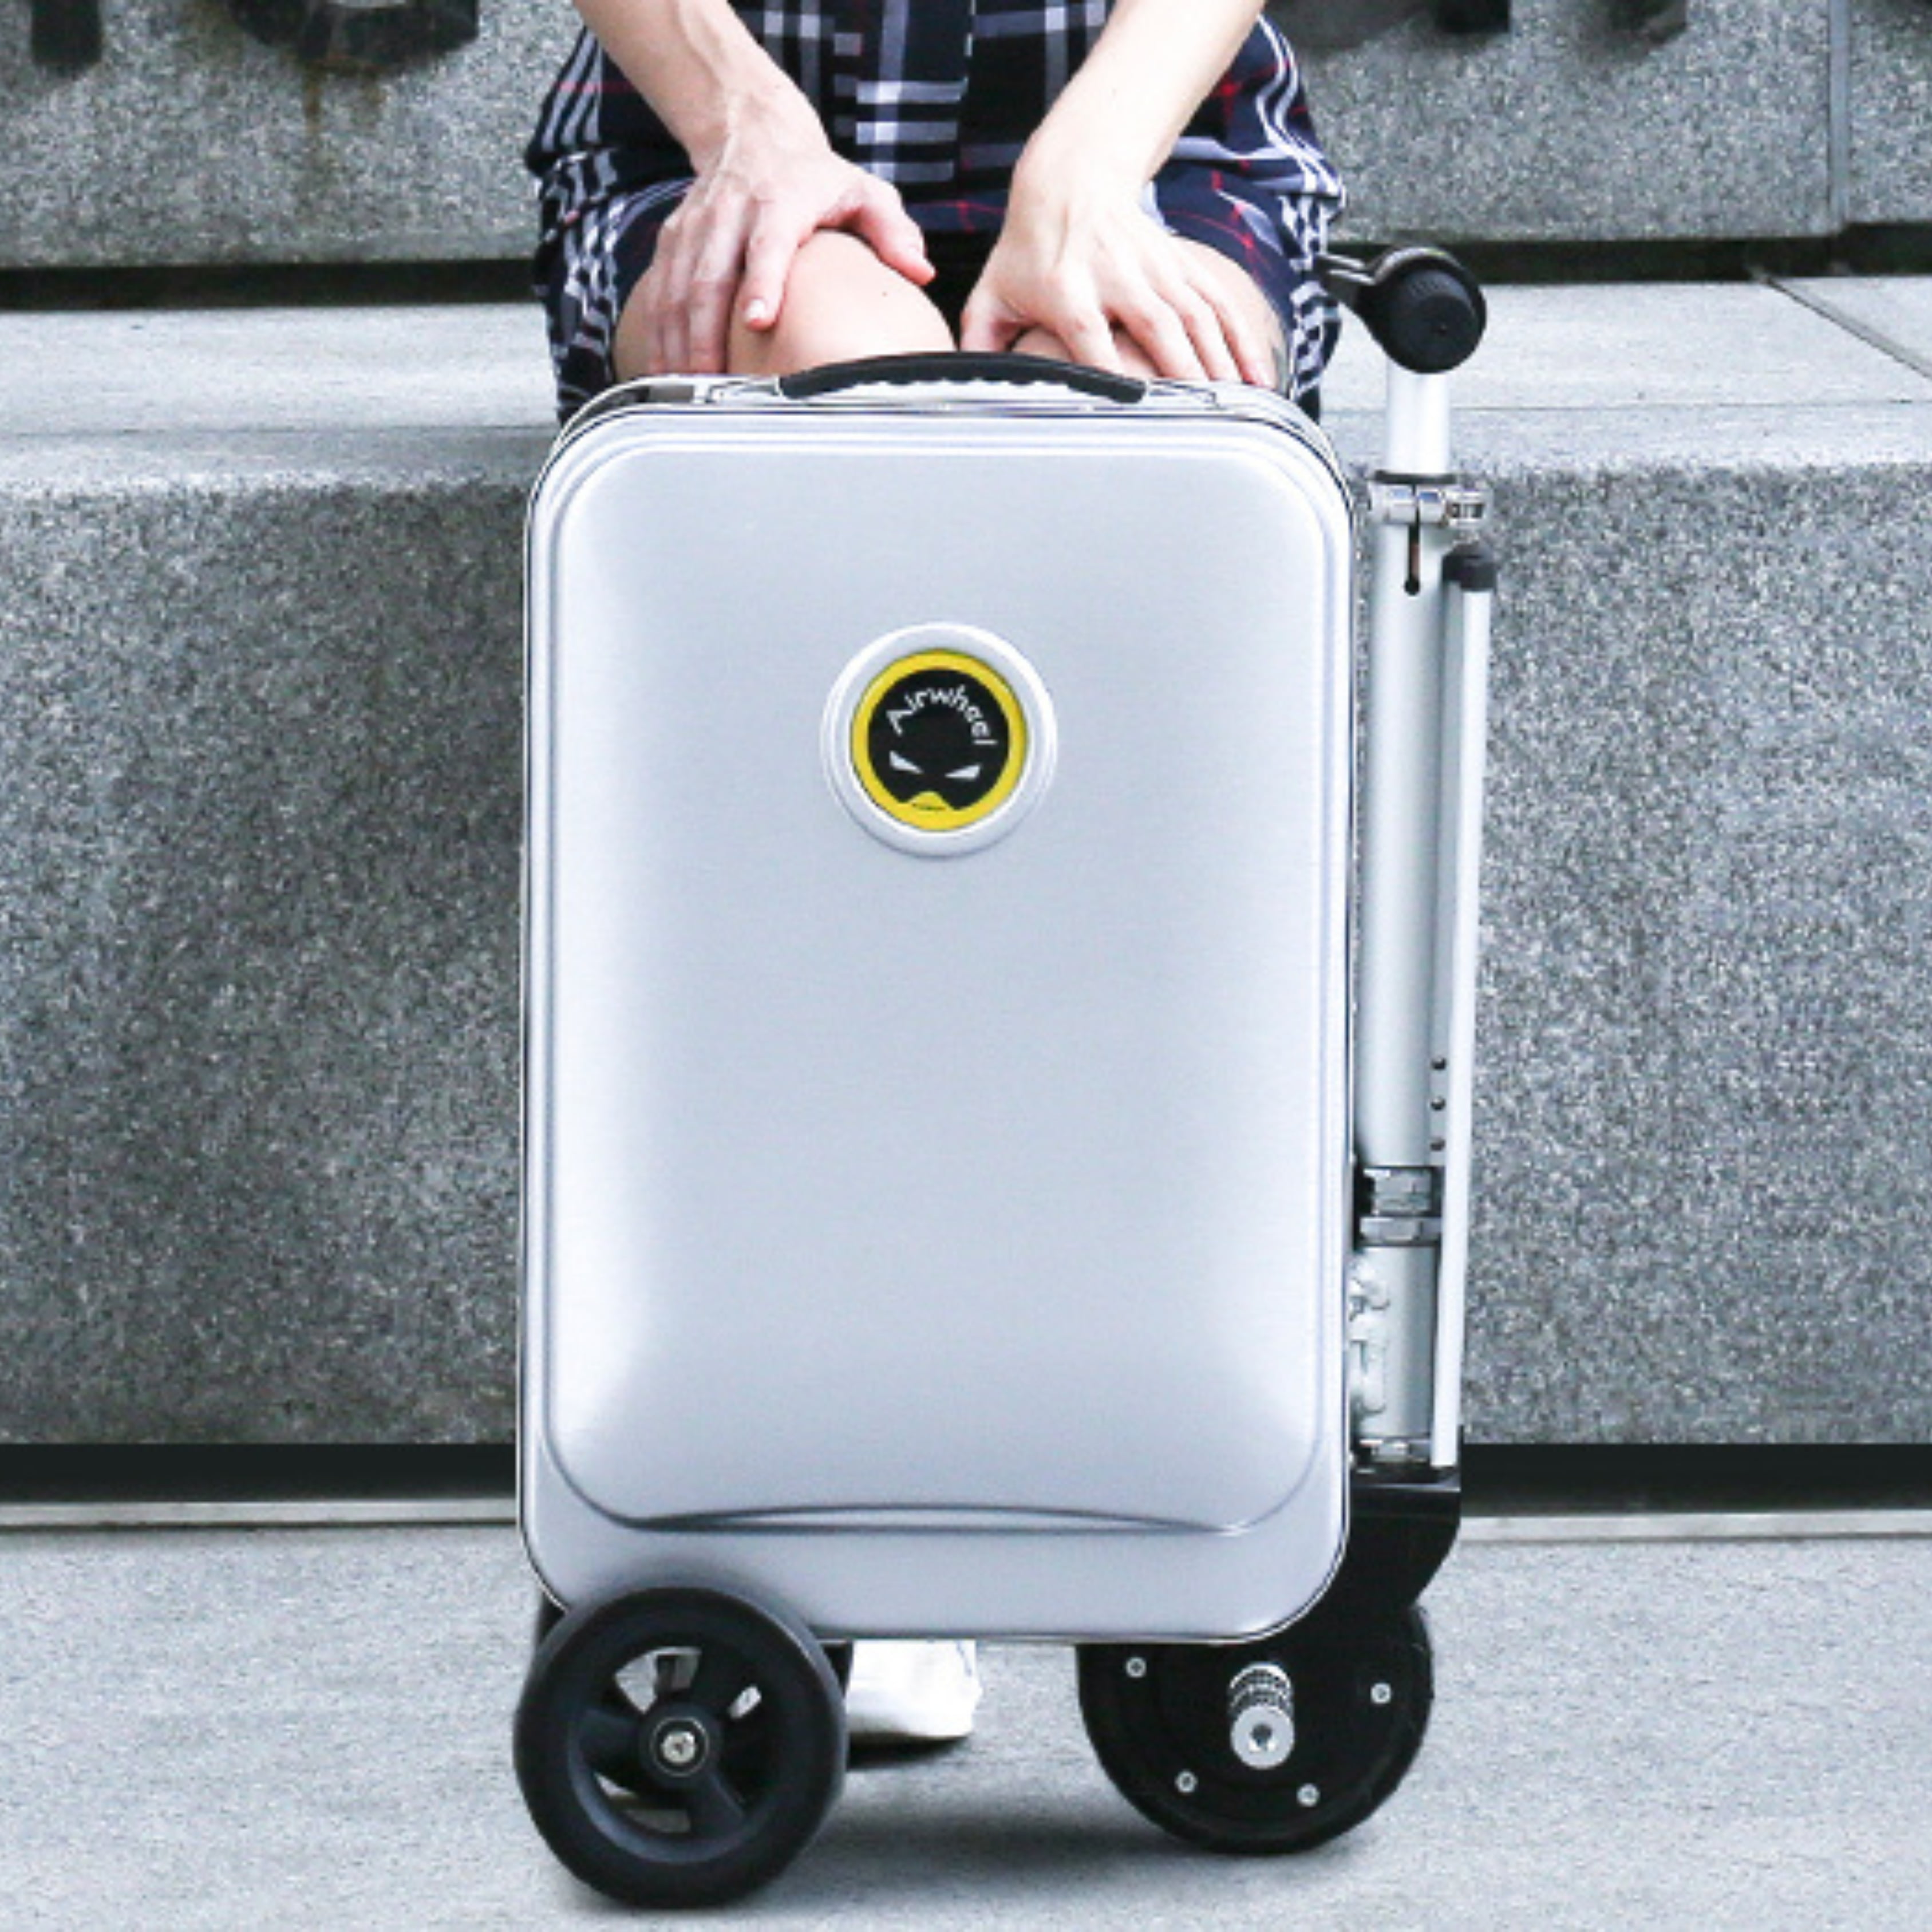 Airwheel SE3S Electric Mini Smart Silver Scooter Luggage 20 Inch Riding  Suitcase